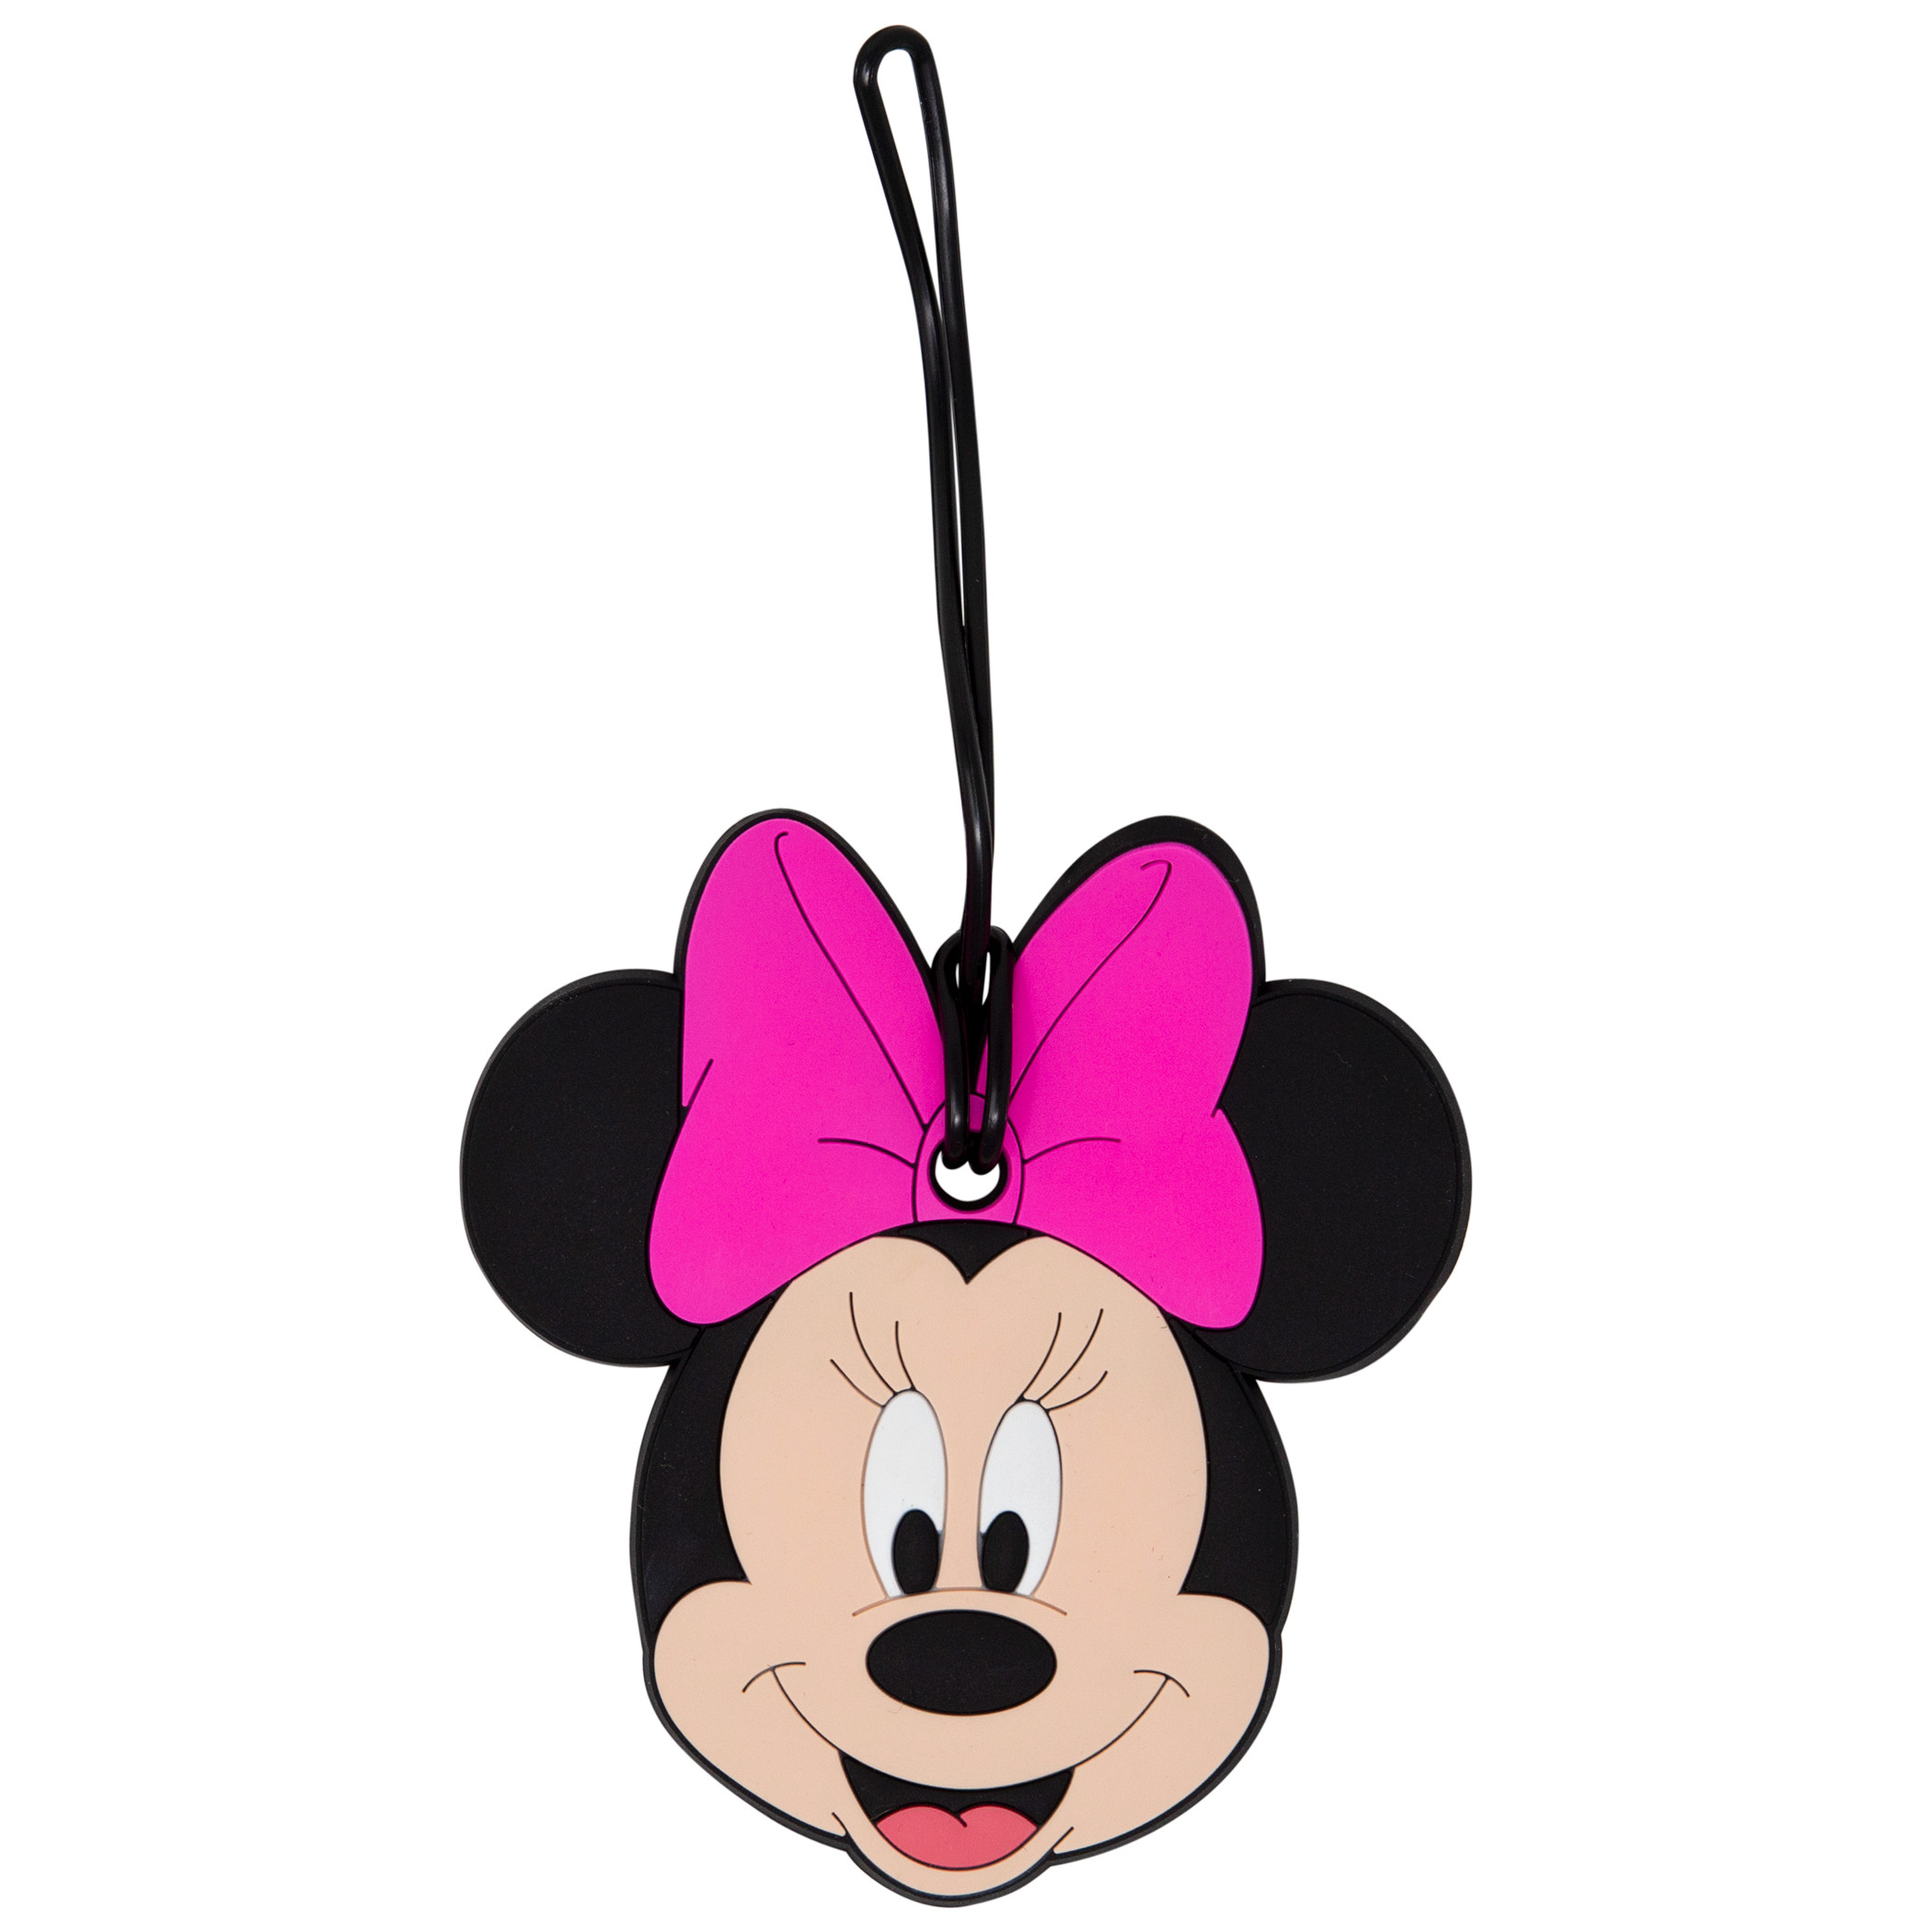 Minnie Mouse Luggage Tag